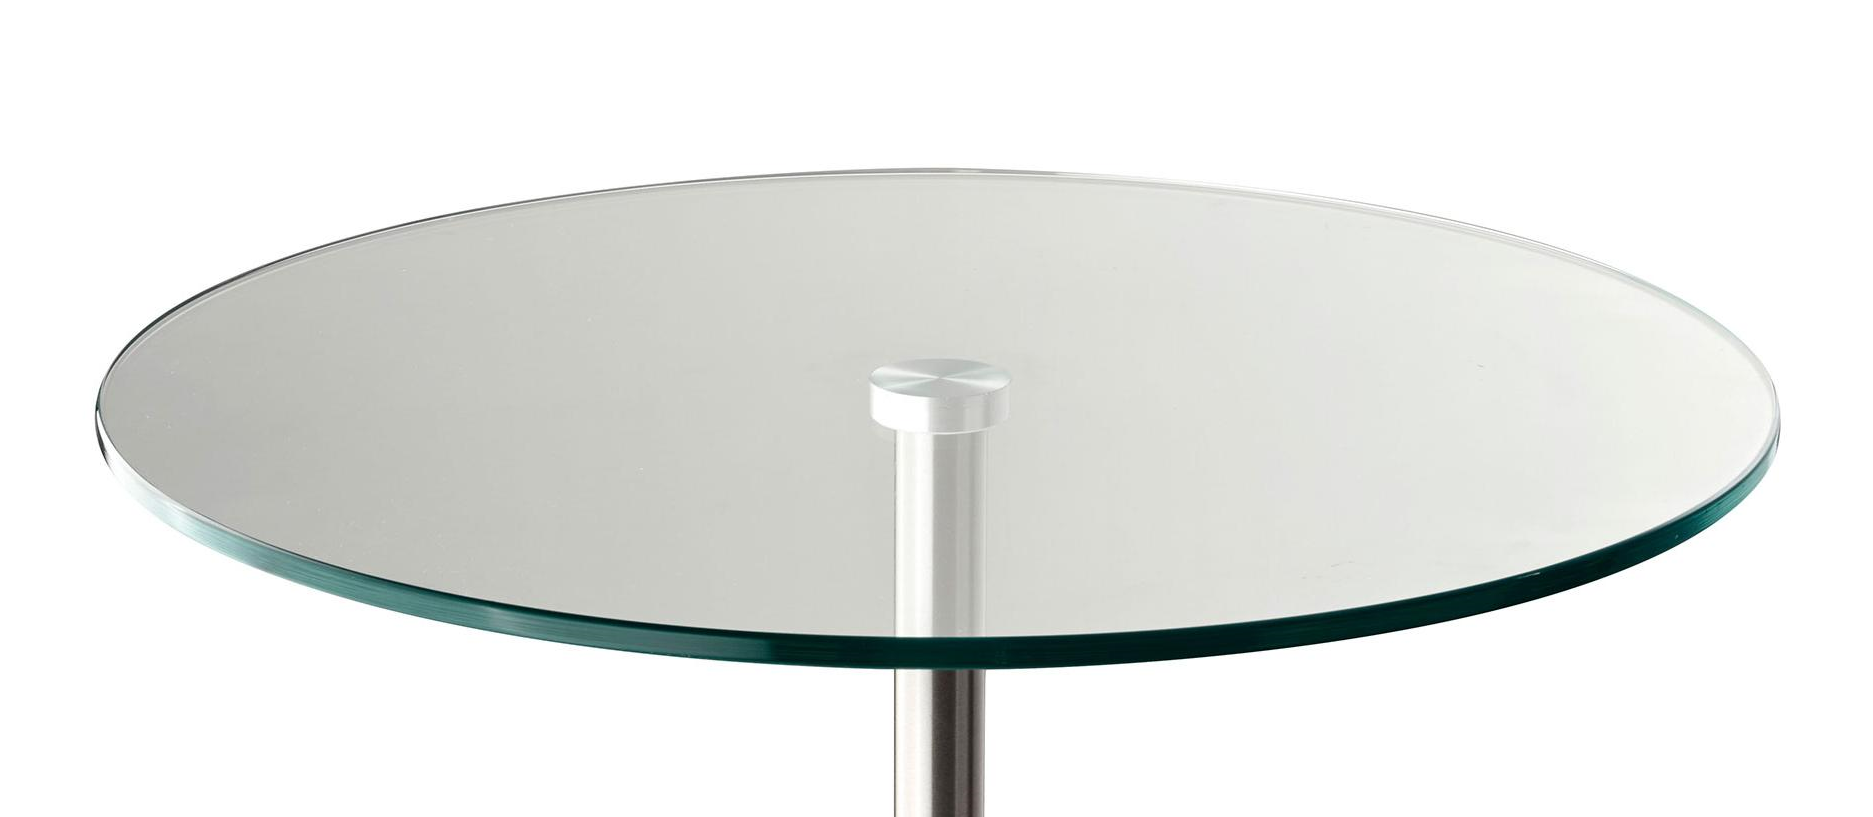 17.75" X 17.75" X 21" Brushed steel White Marble End Table